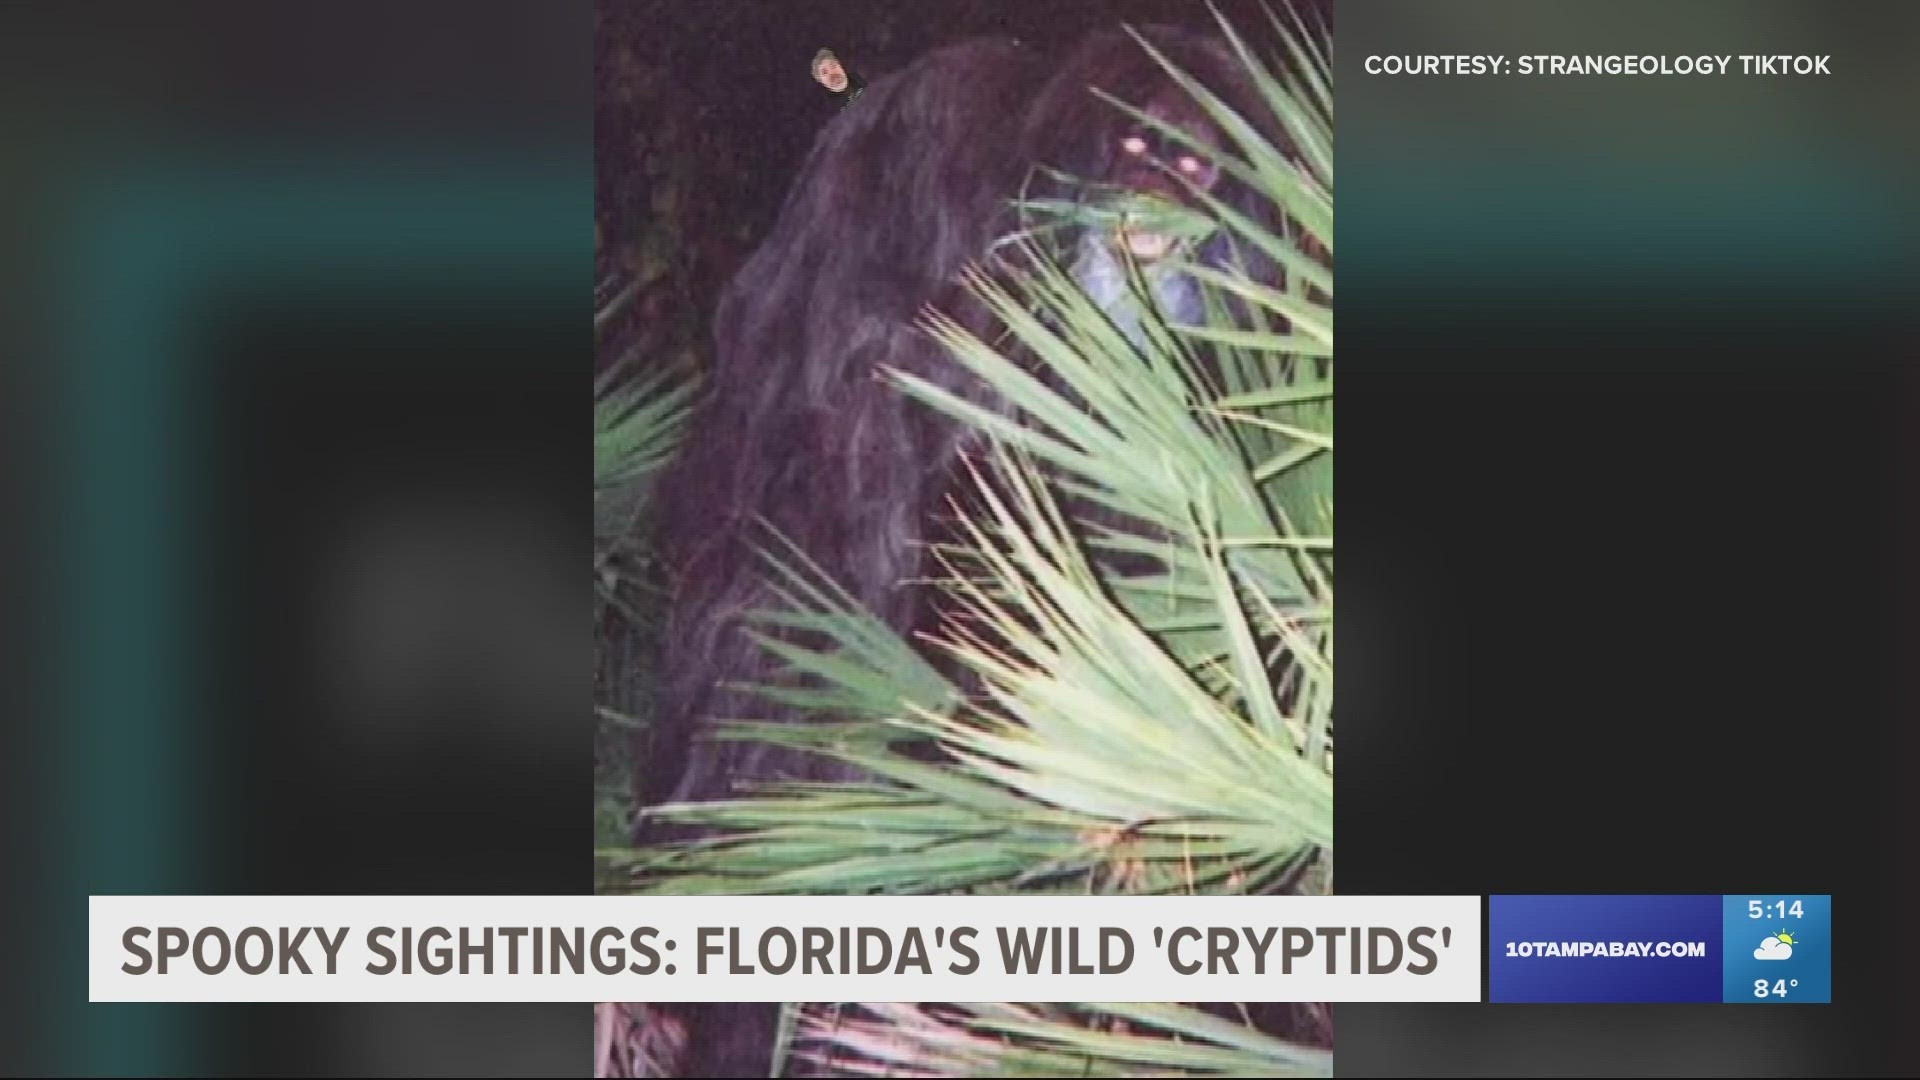 Cryptids are animals whose existence is disputed or unsubstantiated by science like Bigfoot or the Loch Ness Monster.